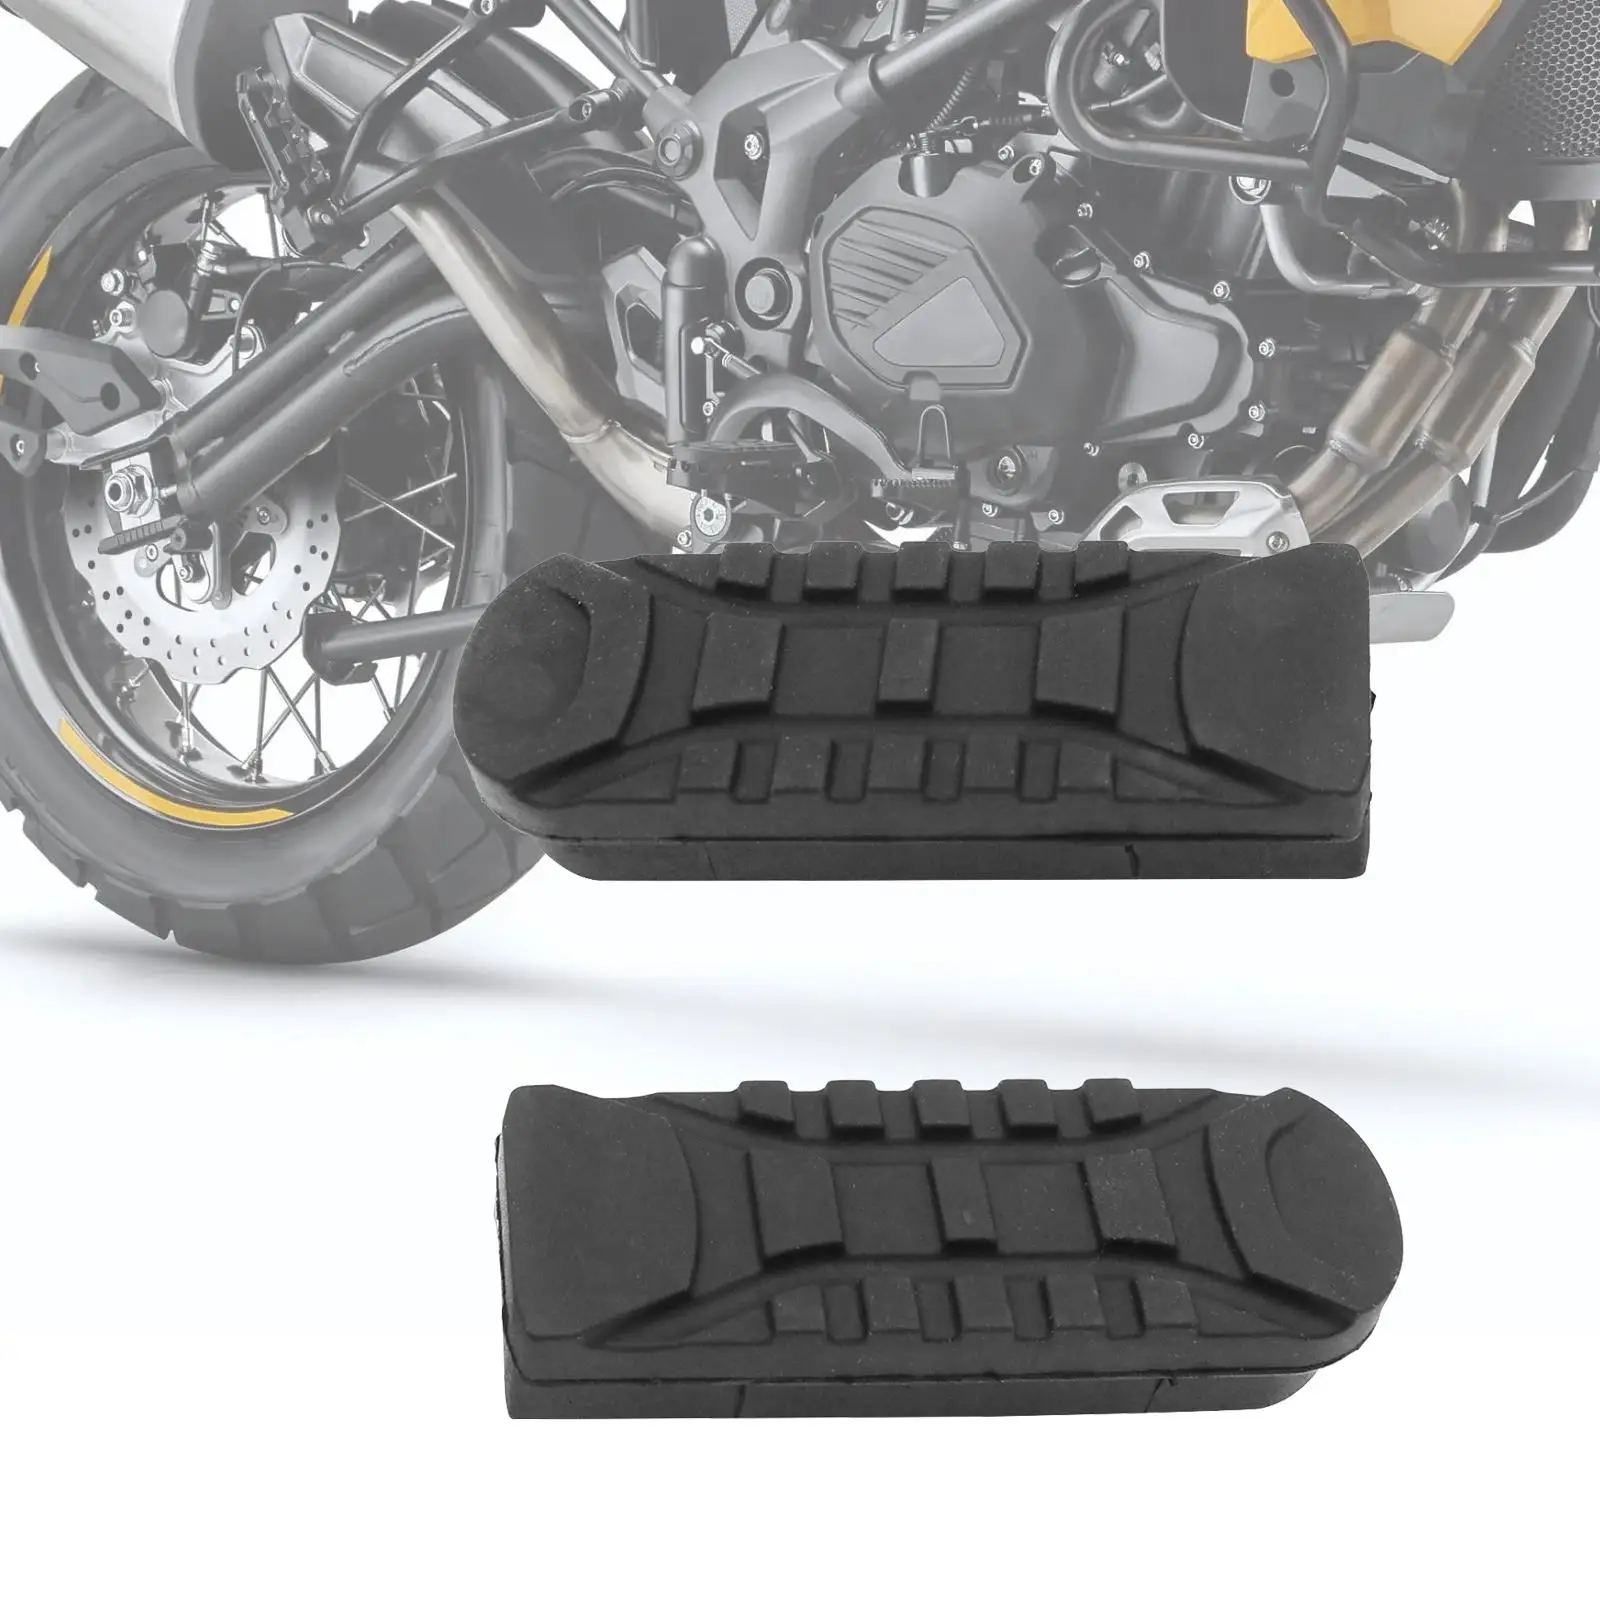 Cle front rubber footrest coves footpeg covers footrest pedal foot peg cover shell anti thumb200